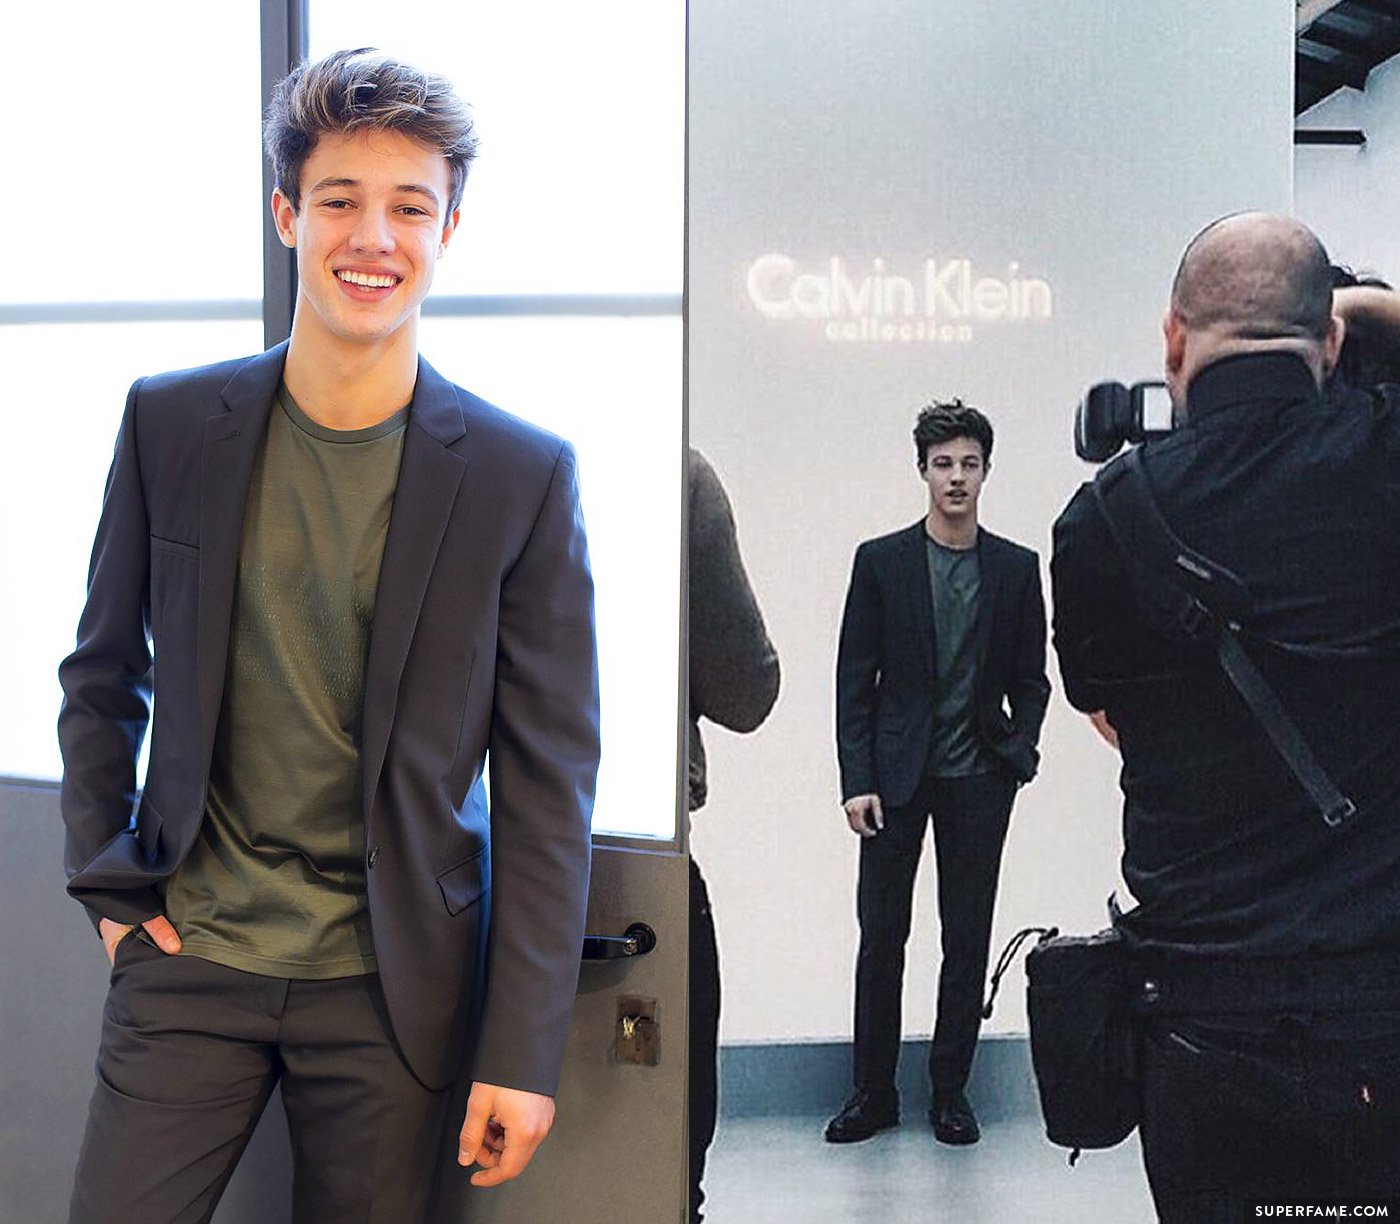 Cameron in a suit.